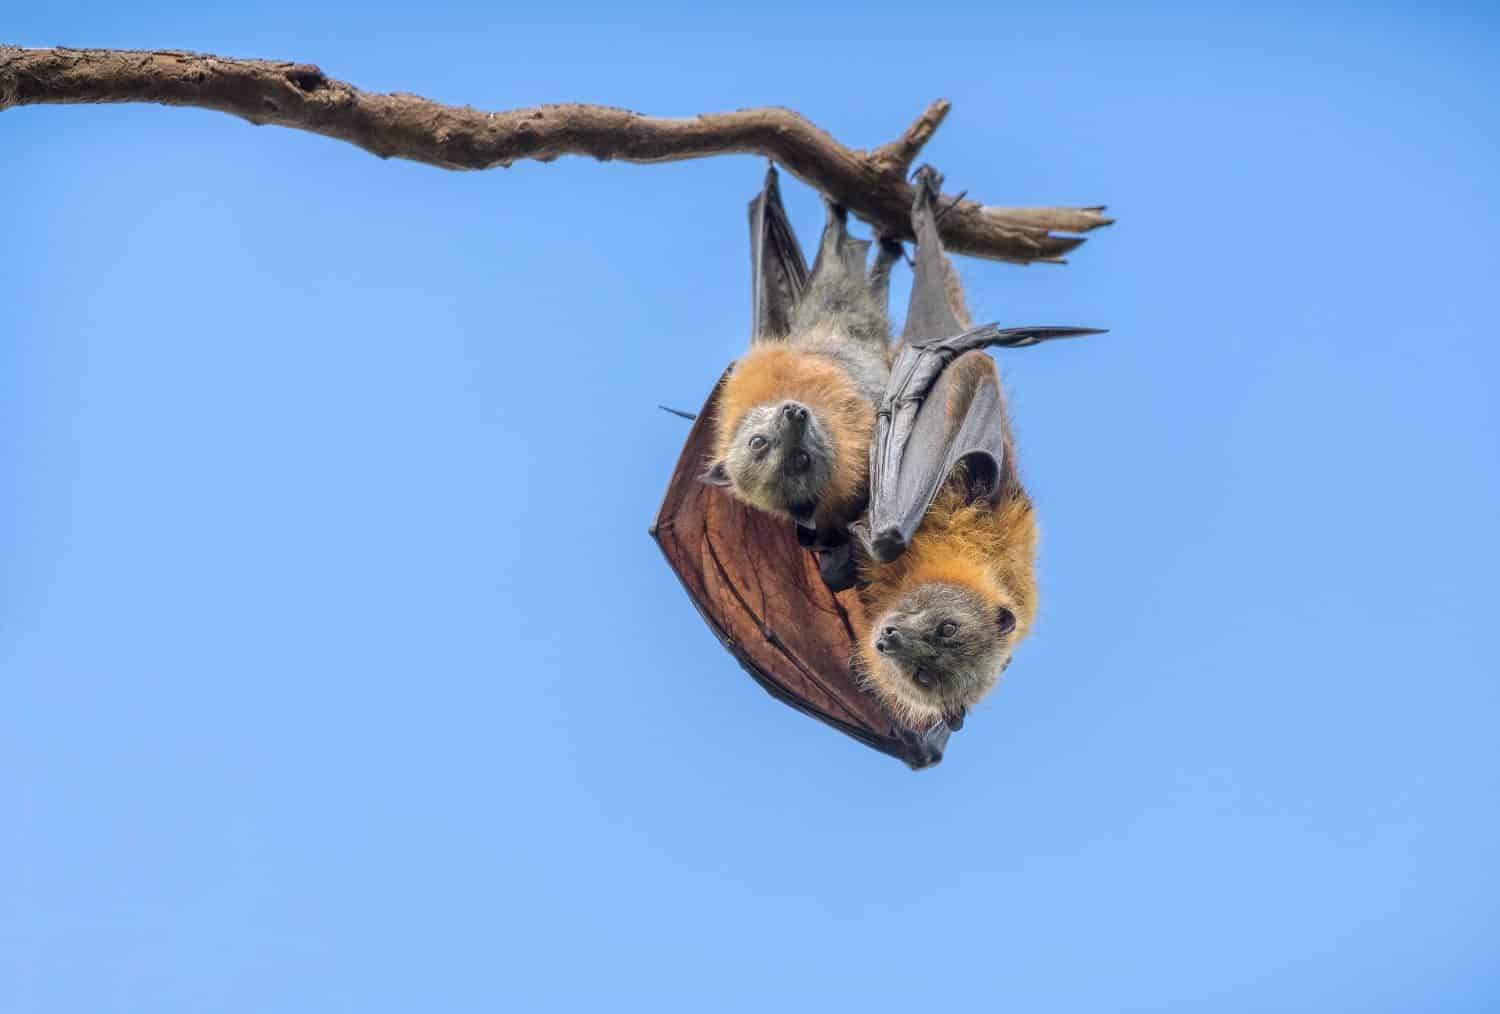 A baby flying fox and its parent cuddling on a branch. The two bats are looking down with a blue sky in the background.